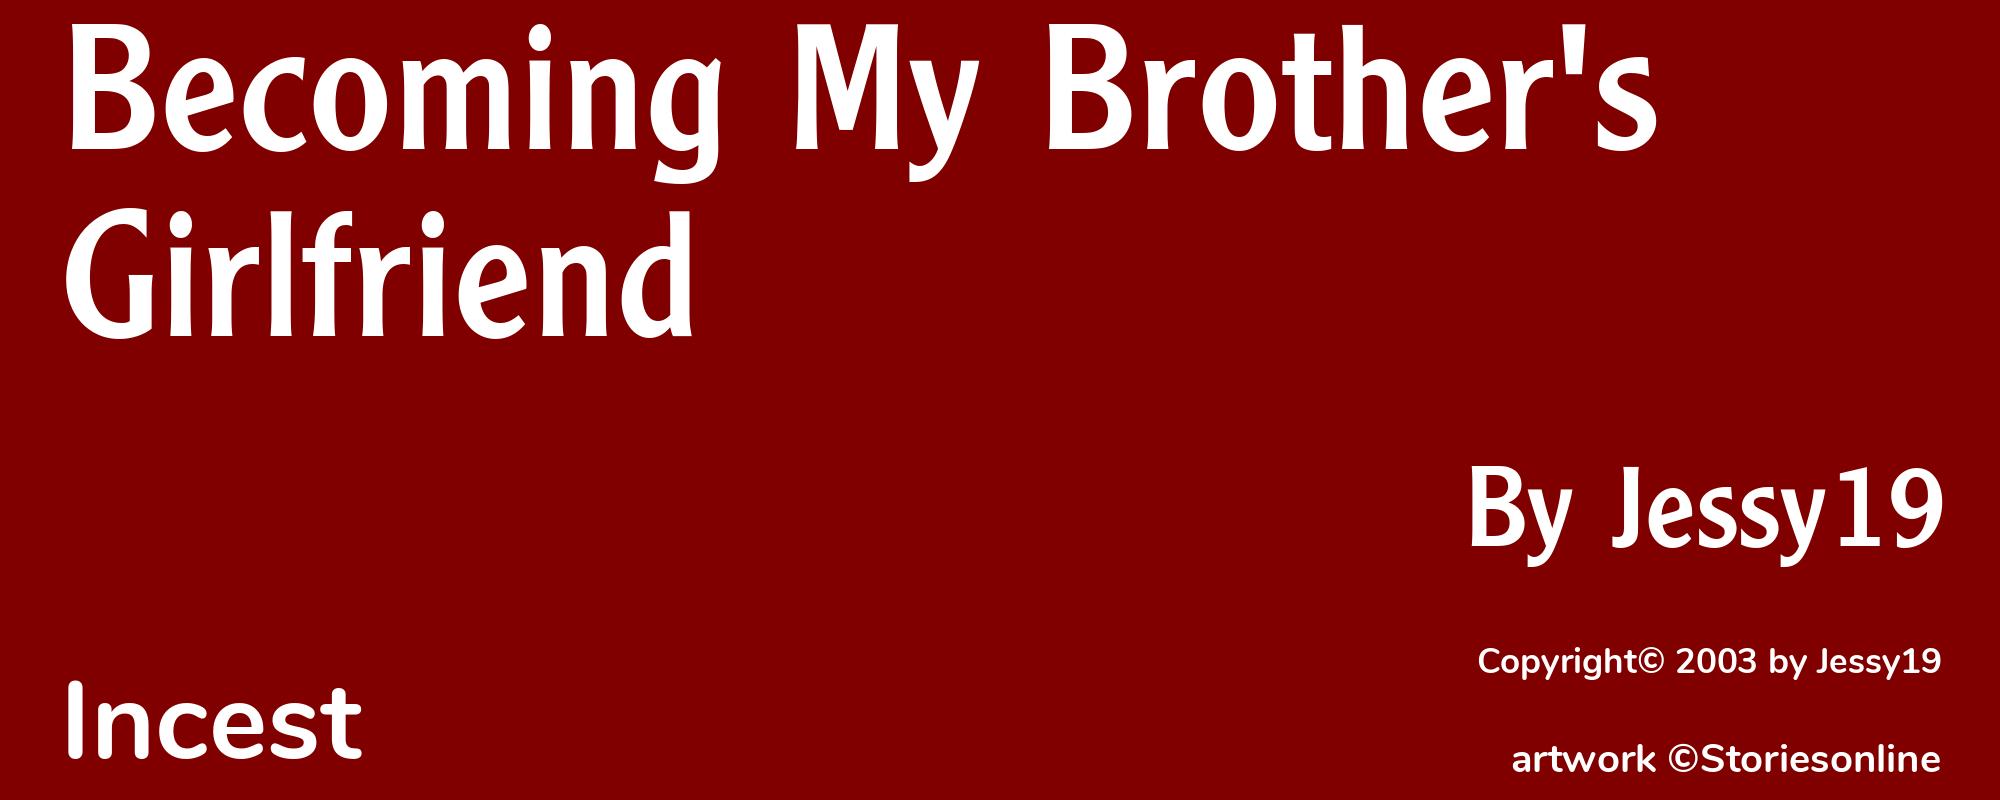 Becoming My Brother's Girlfriend - Cover